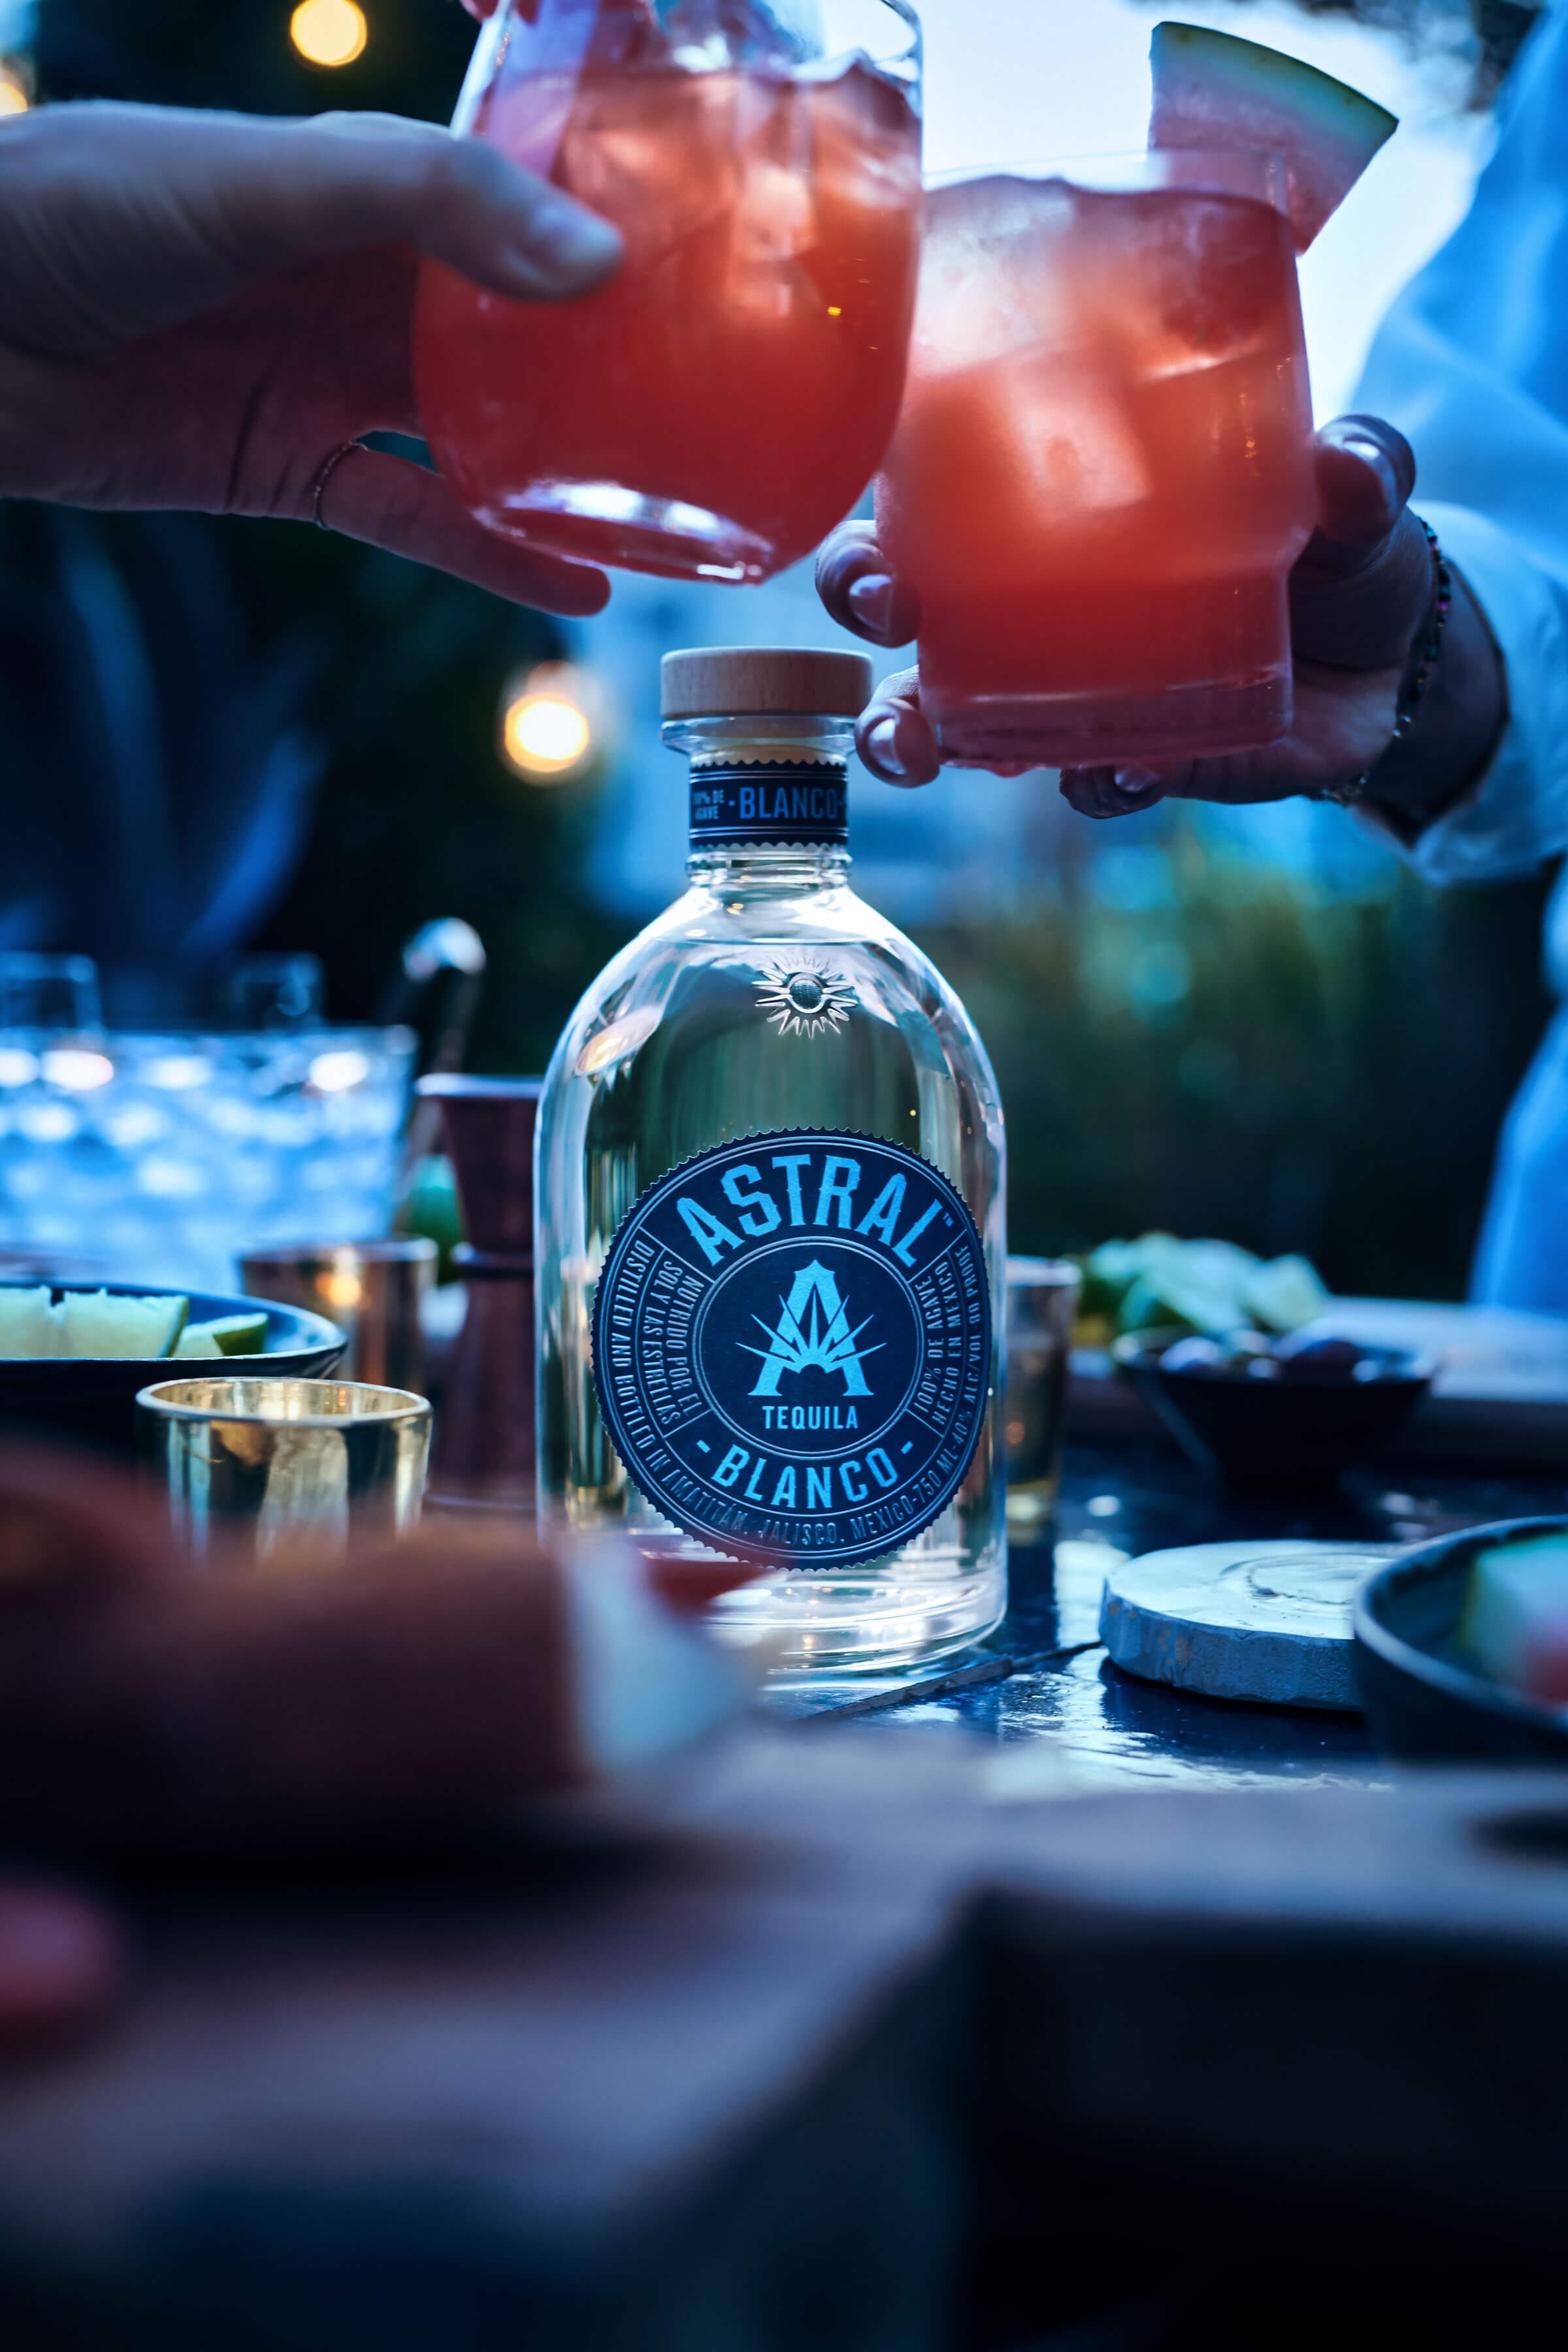 Bottle of Astral Tequila, above hands bring together two glasses in cheers